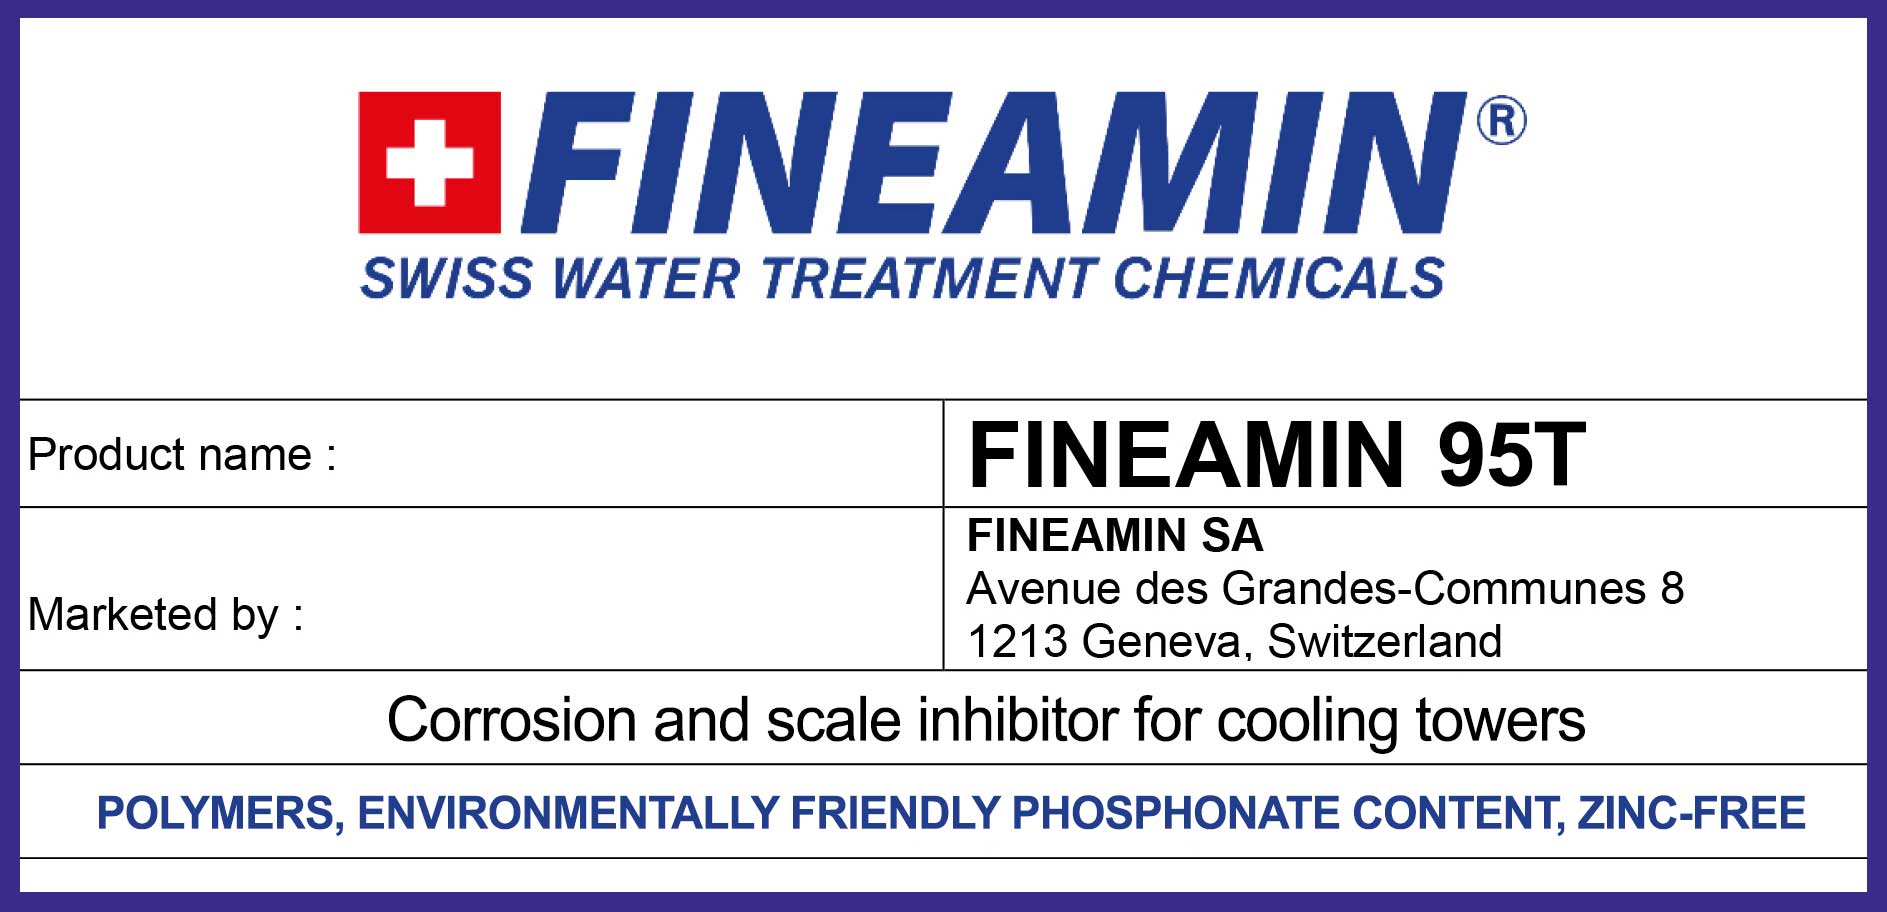 Fineamin 95T corrosion inhibitor for cooling towers